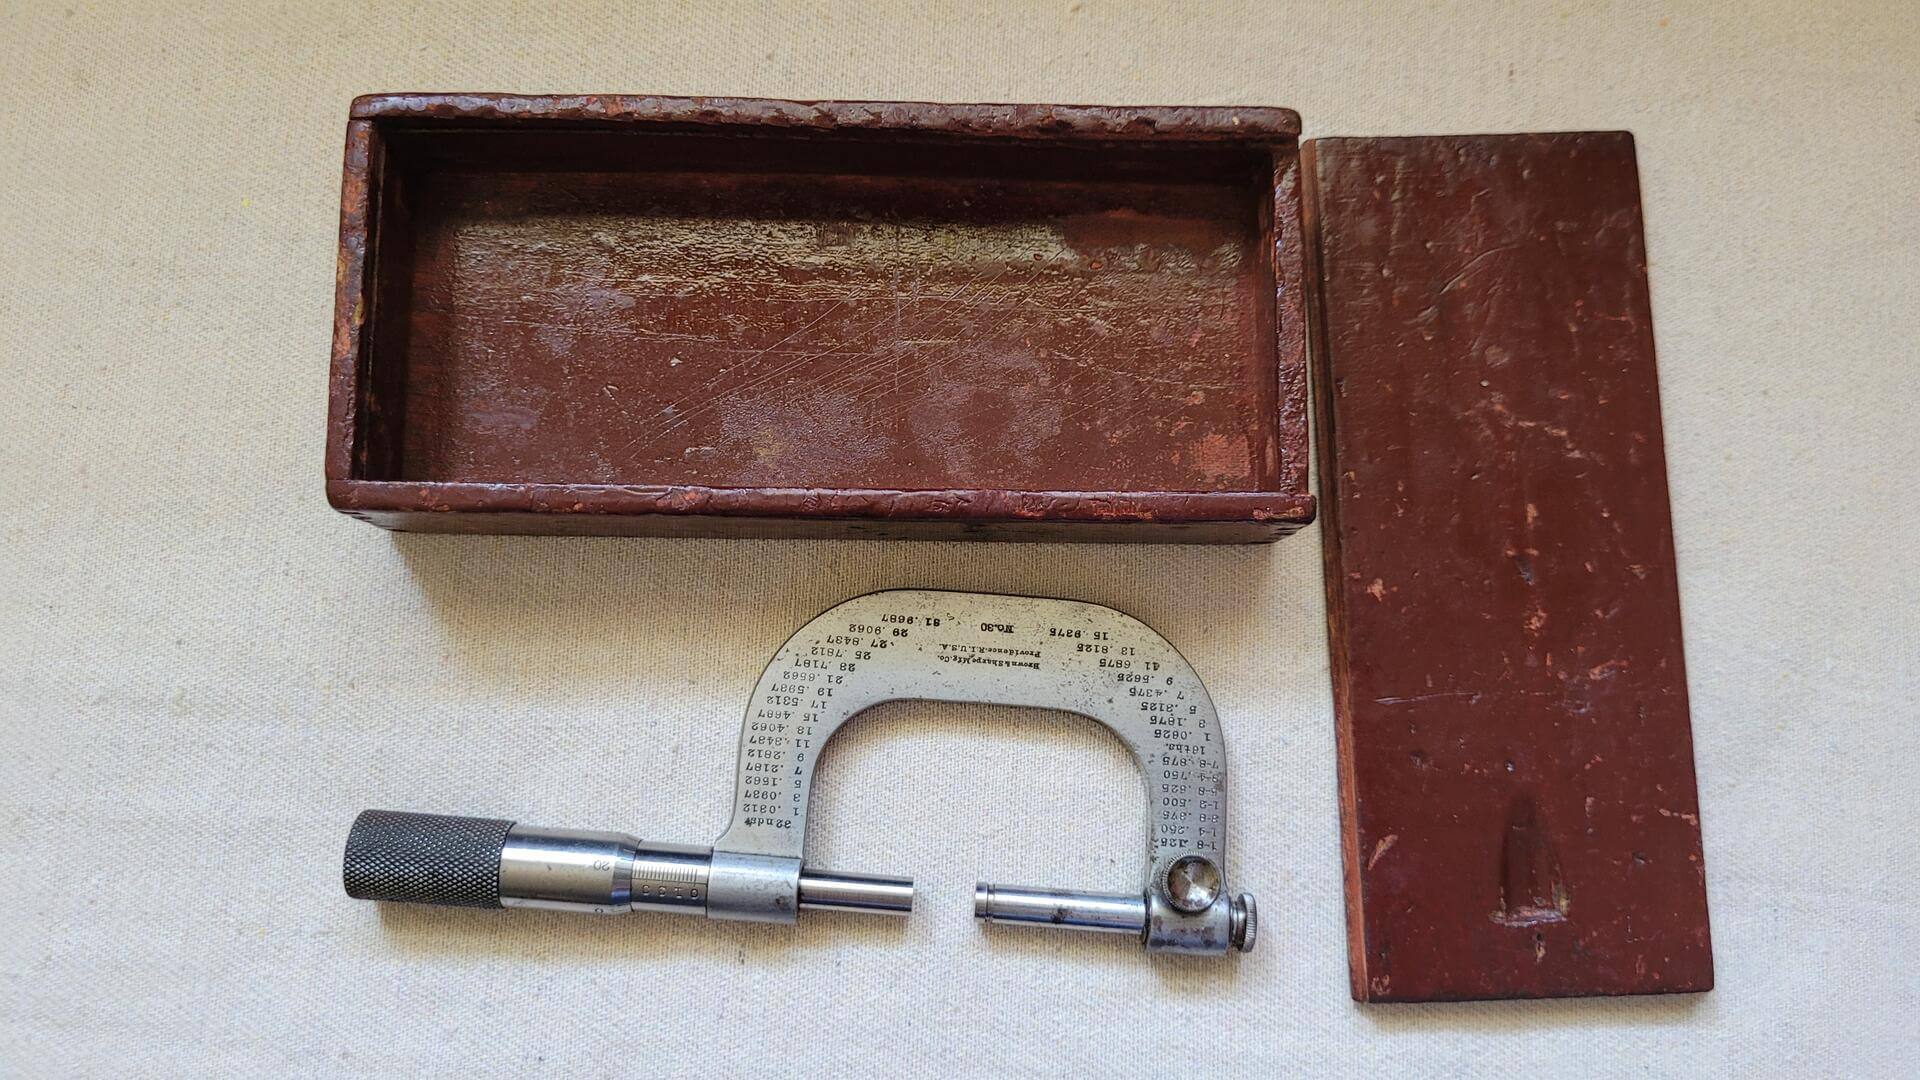 Antique Browne & Sharp Mfg Co No. 30 Micrometer Pat. Nov 6 1894 Providence RI with original case - Vintage made in USA collectible machinist measuring tools